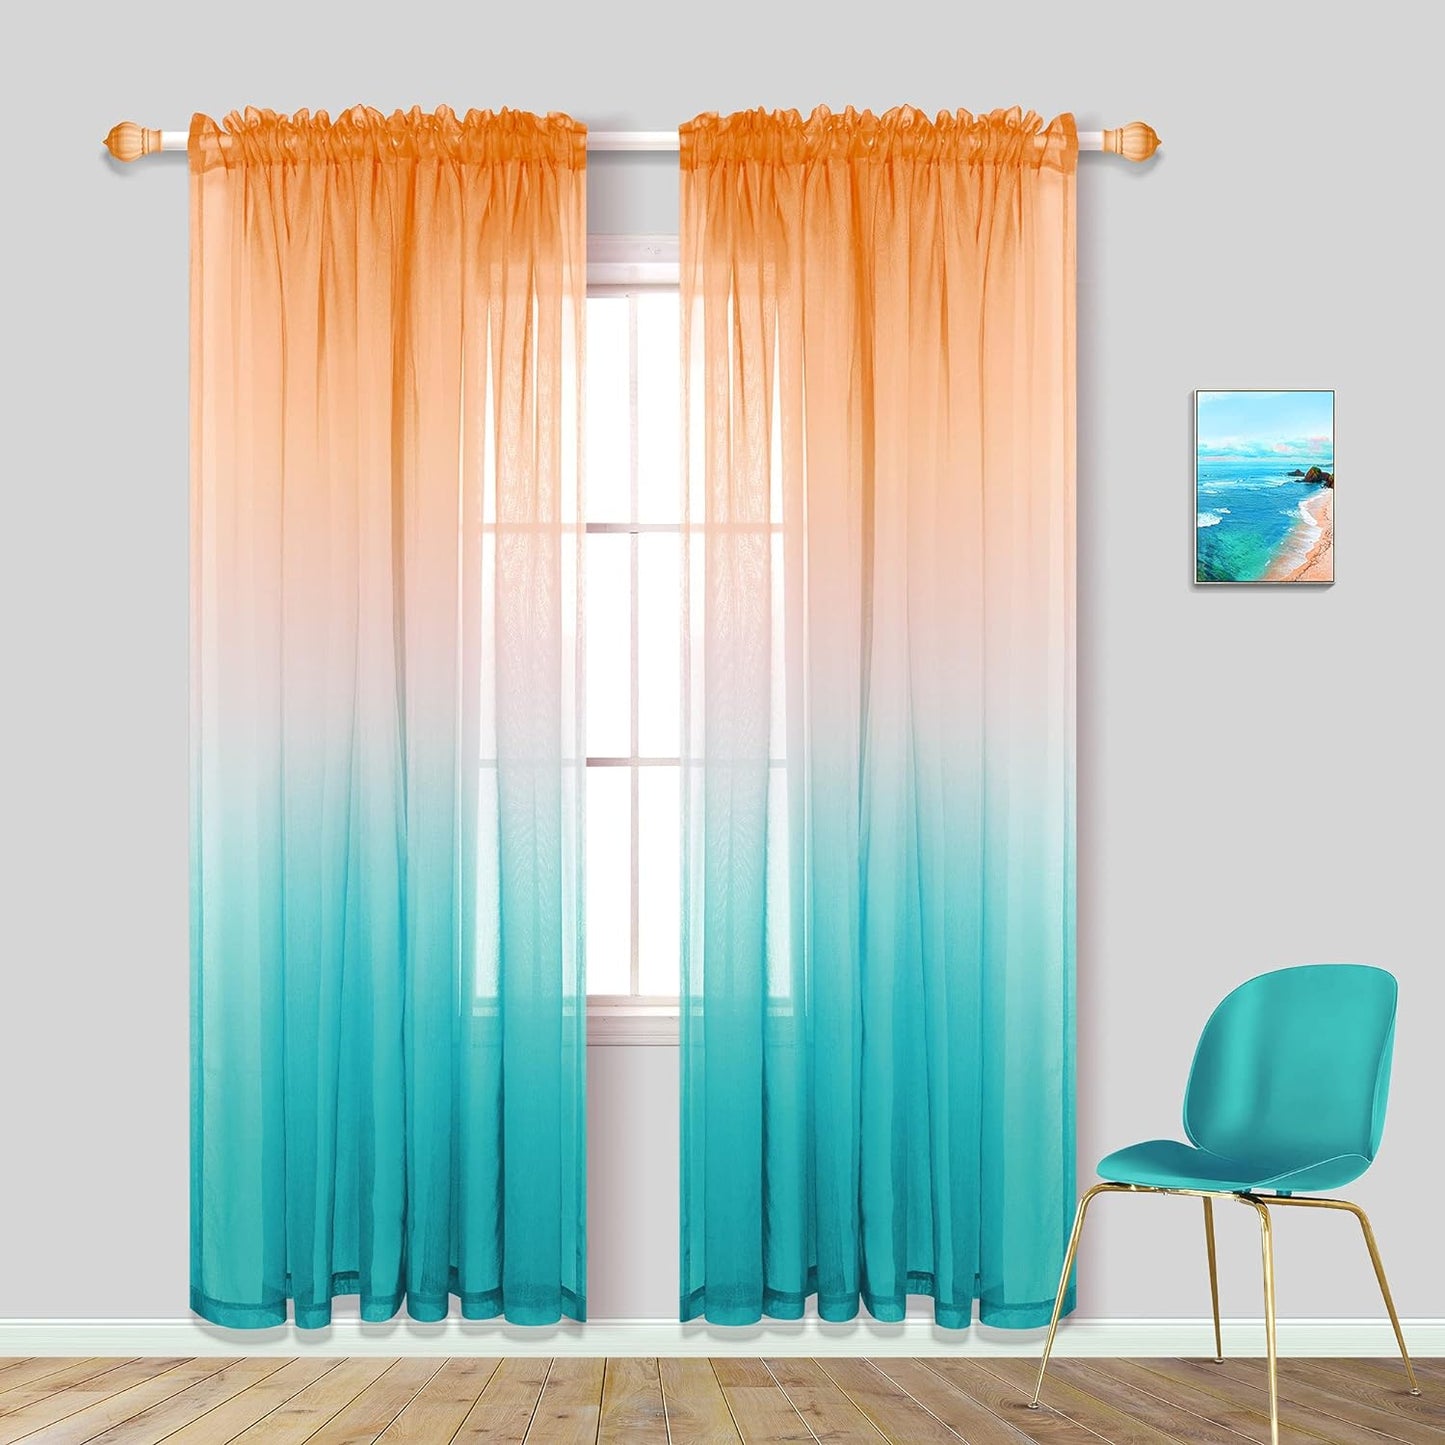 Spring Sheer Curtains for Living Room with Rod Pocket Window Treatments Decor 84 Inch Length Bedroom Curtain Set of 2 Panels Yellow and Grey Gray  PITALK TEXTILE Orange And Turquoise 52X84 